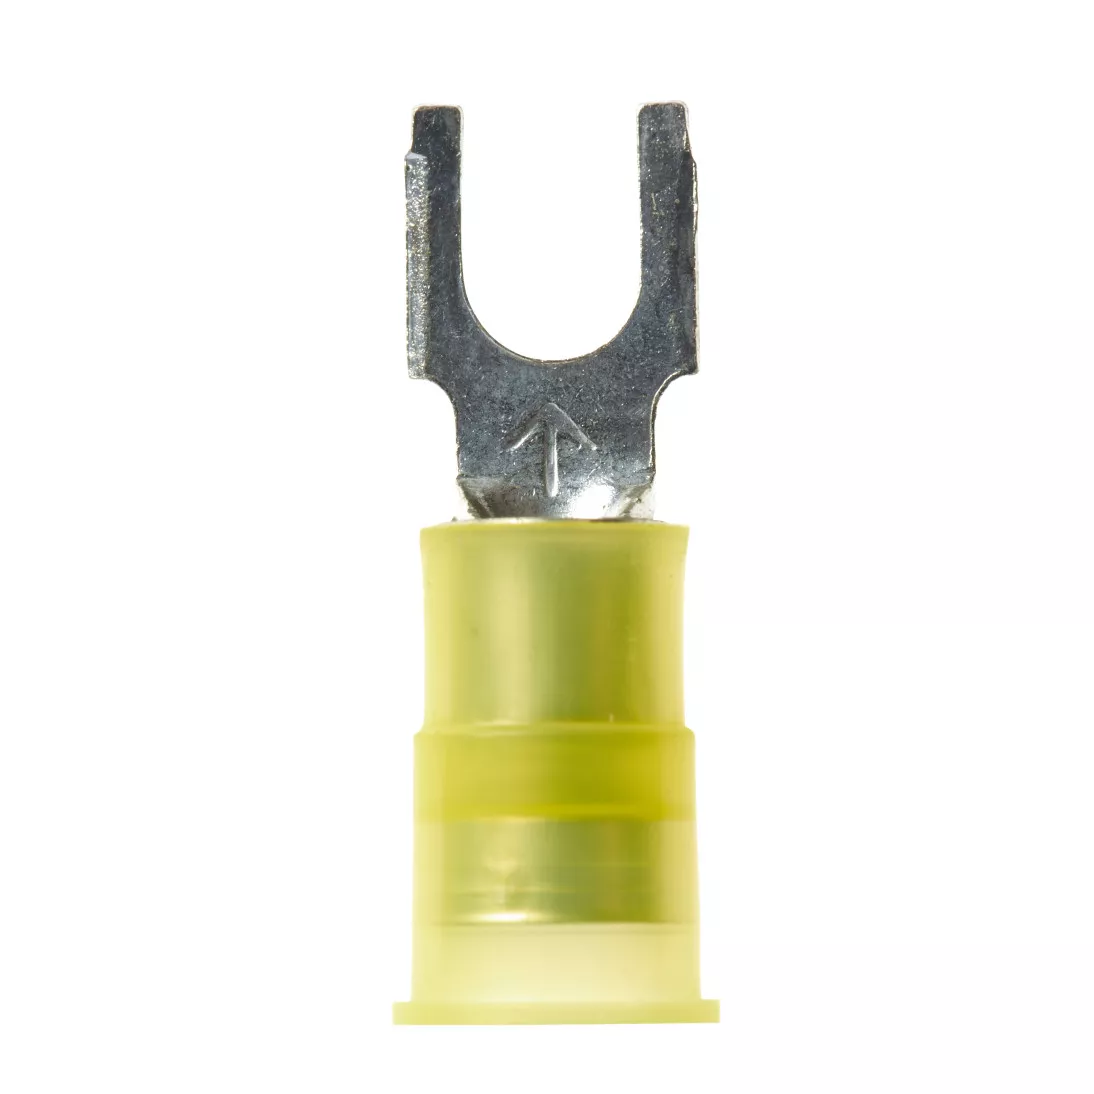 3M™ Scotchlok™ Block Fork Nylon Insulated, 50/bottle, MNG10-6FBX,
suitable for use in a terminal block, 500/Case